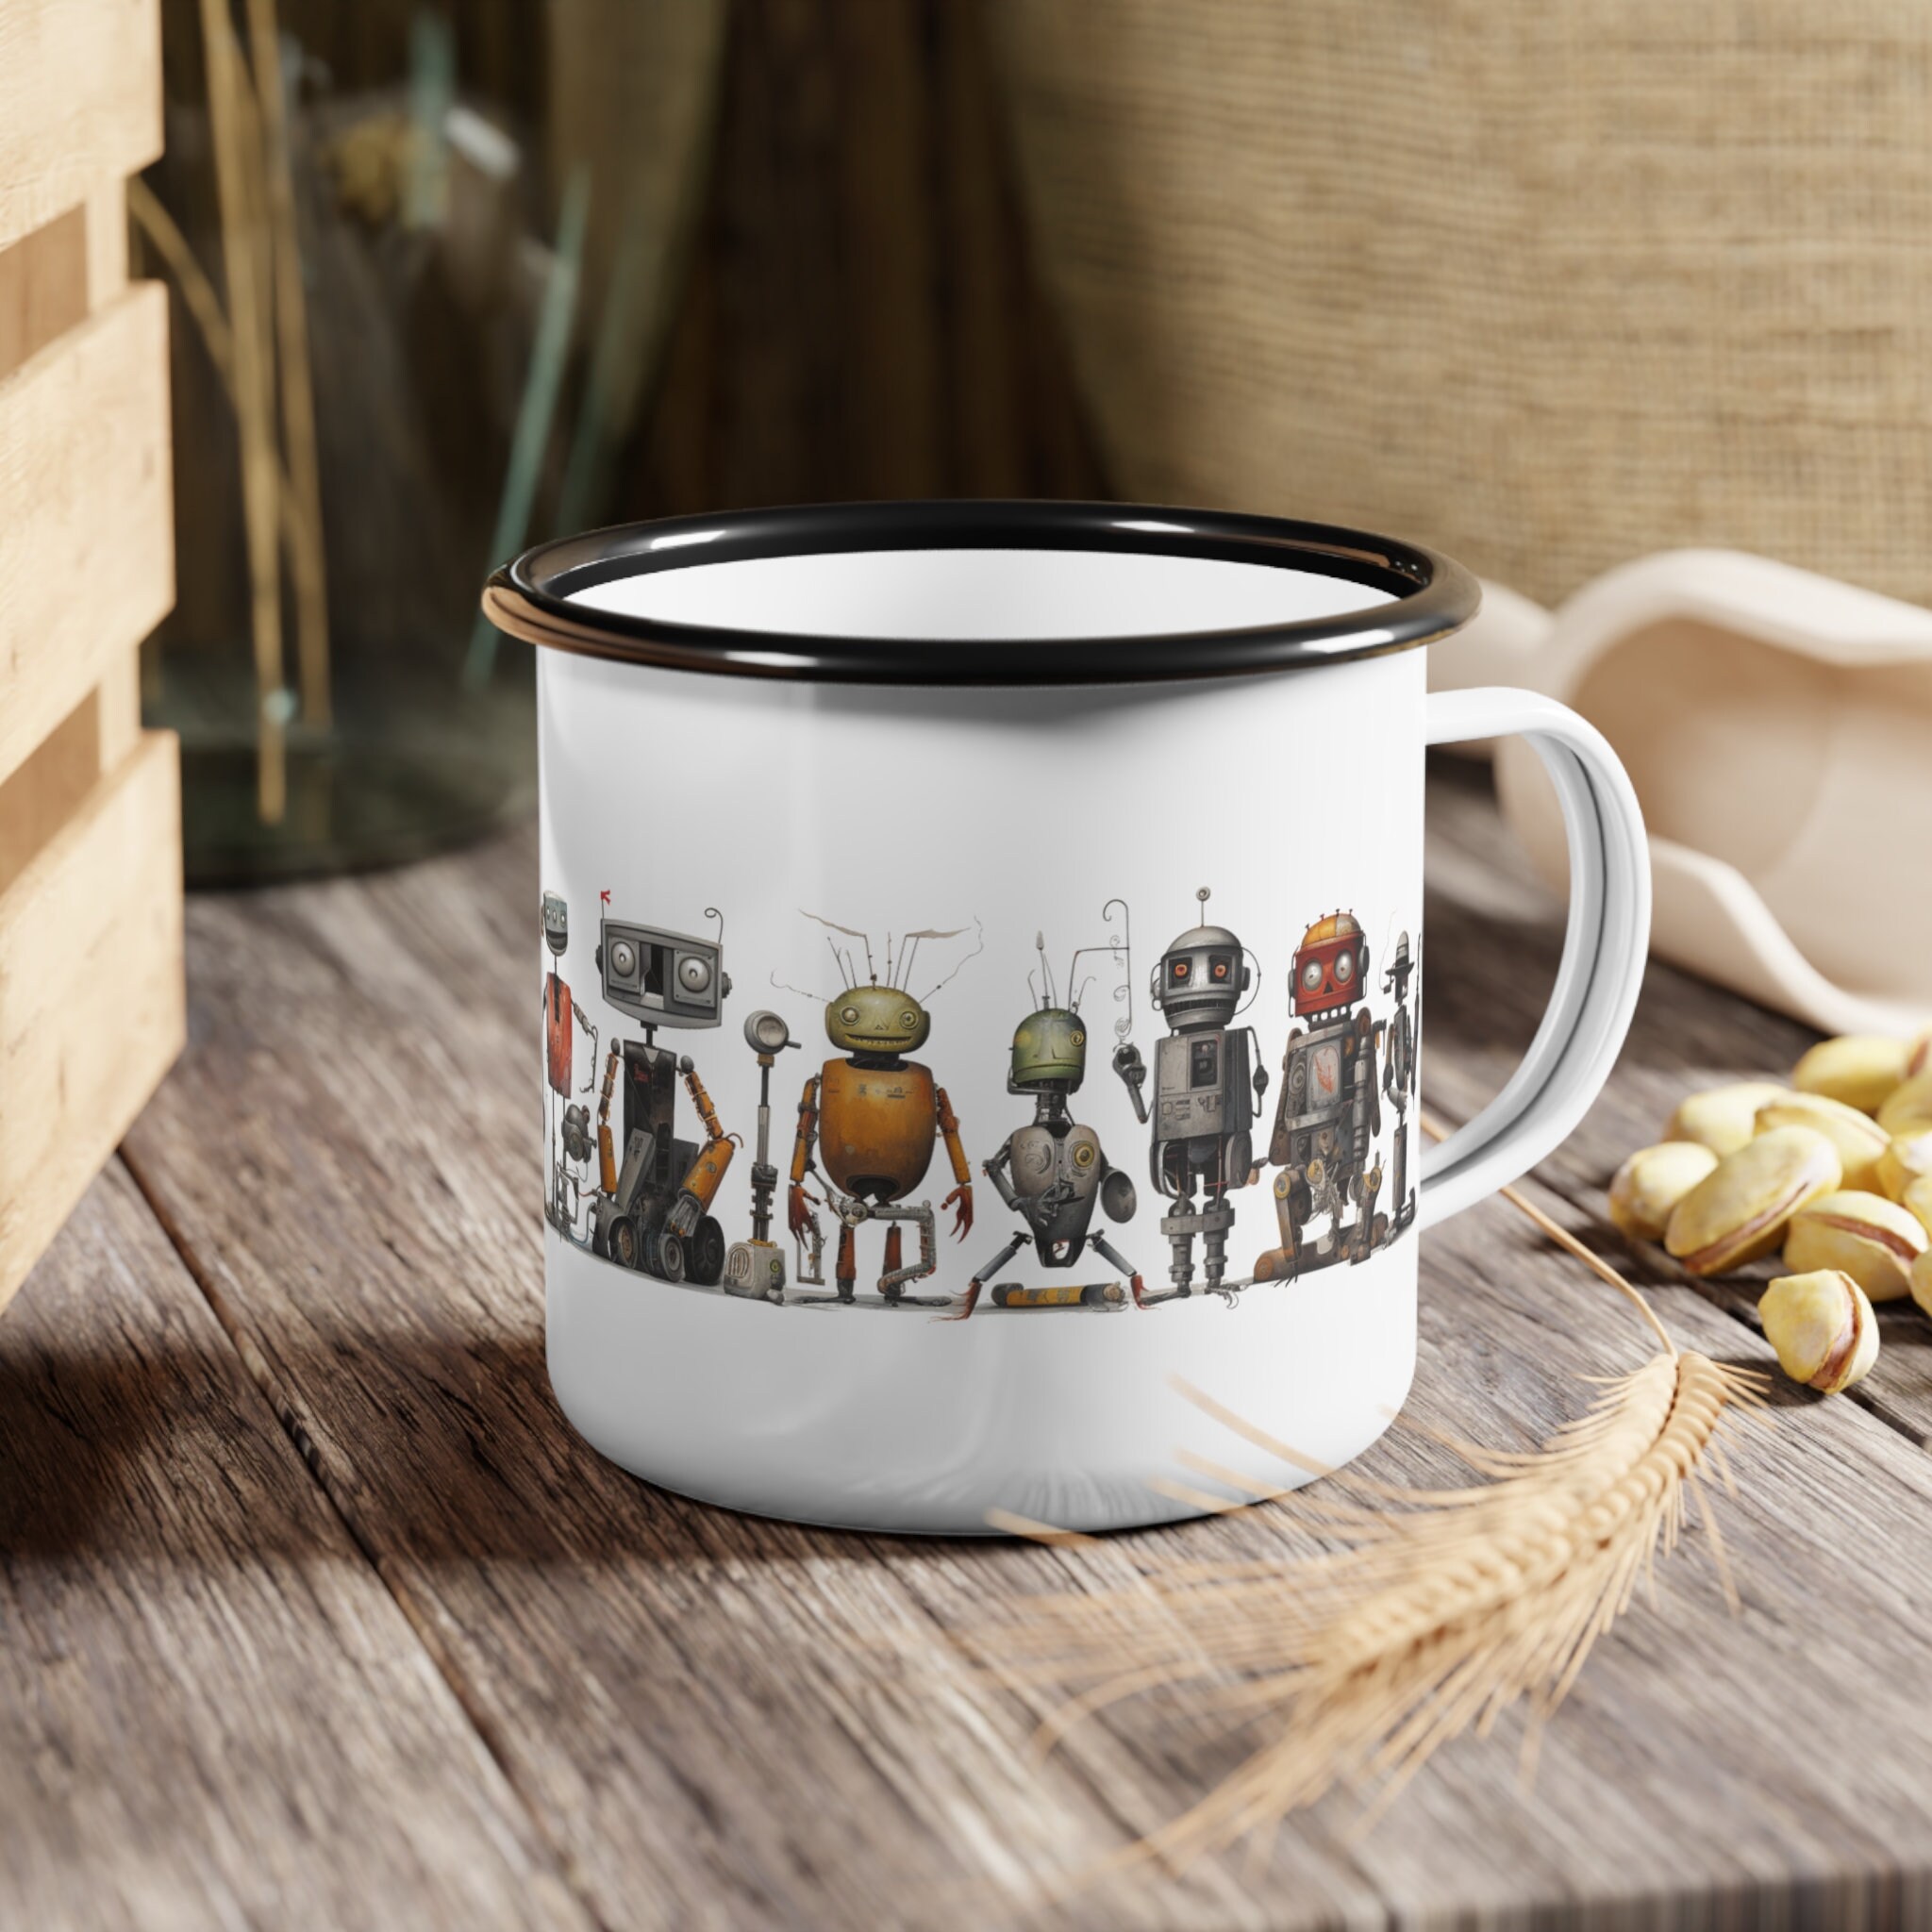 Sci-Fi Cup Concepts : star wars cup